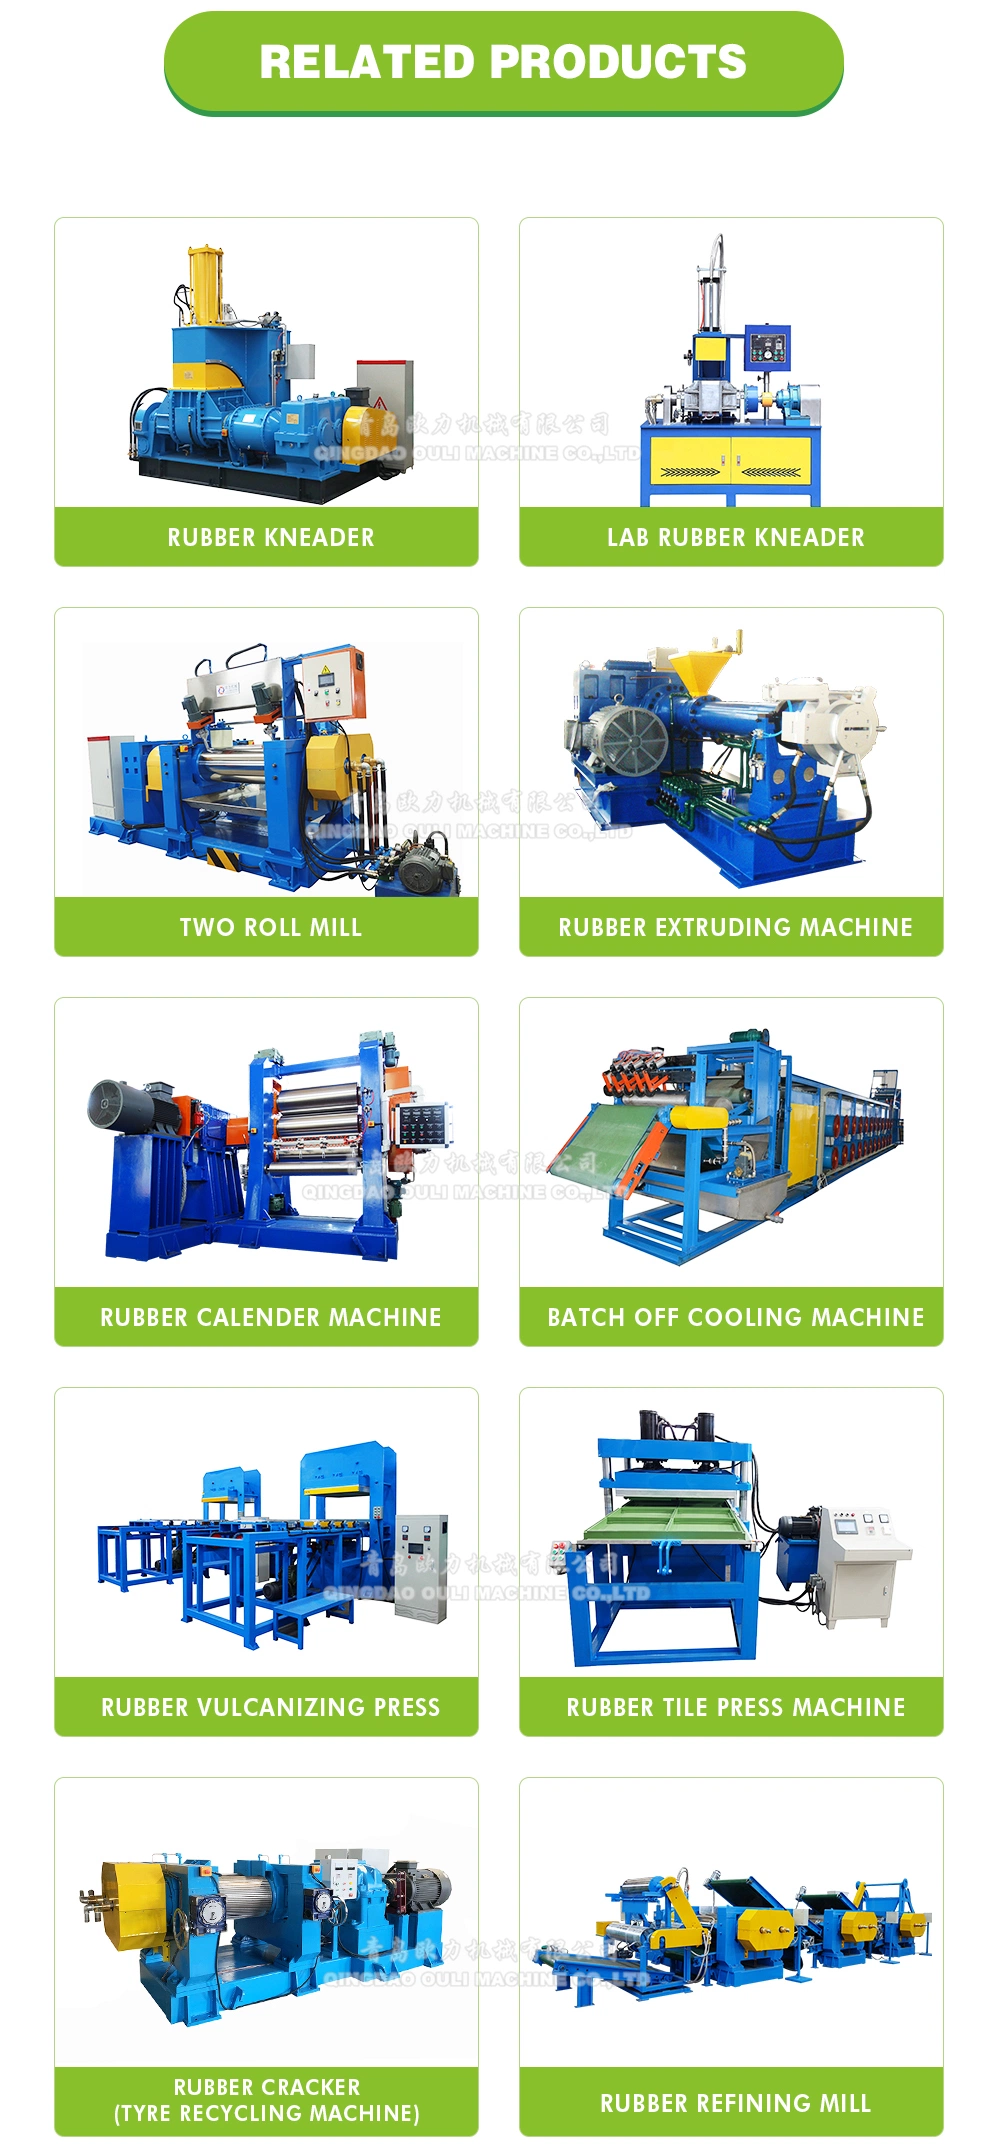 1000*1000 EPDM Rubber Tiles Hydraulic Press, , Rubber Vulcanizing Press, Vulcanizer Press, Hydraulic Press Machine